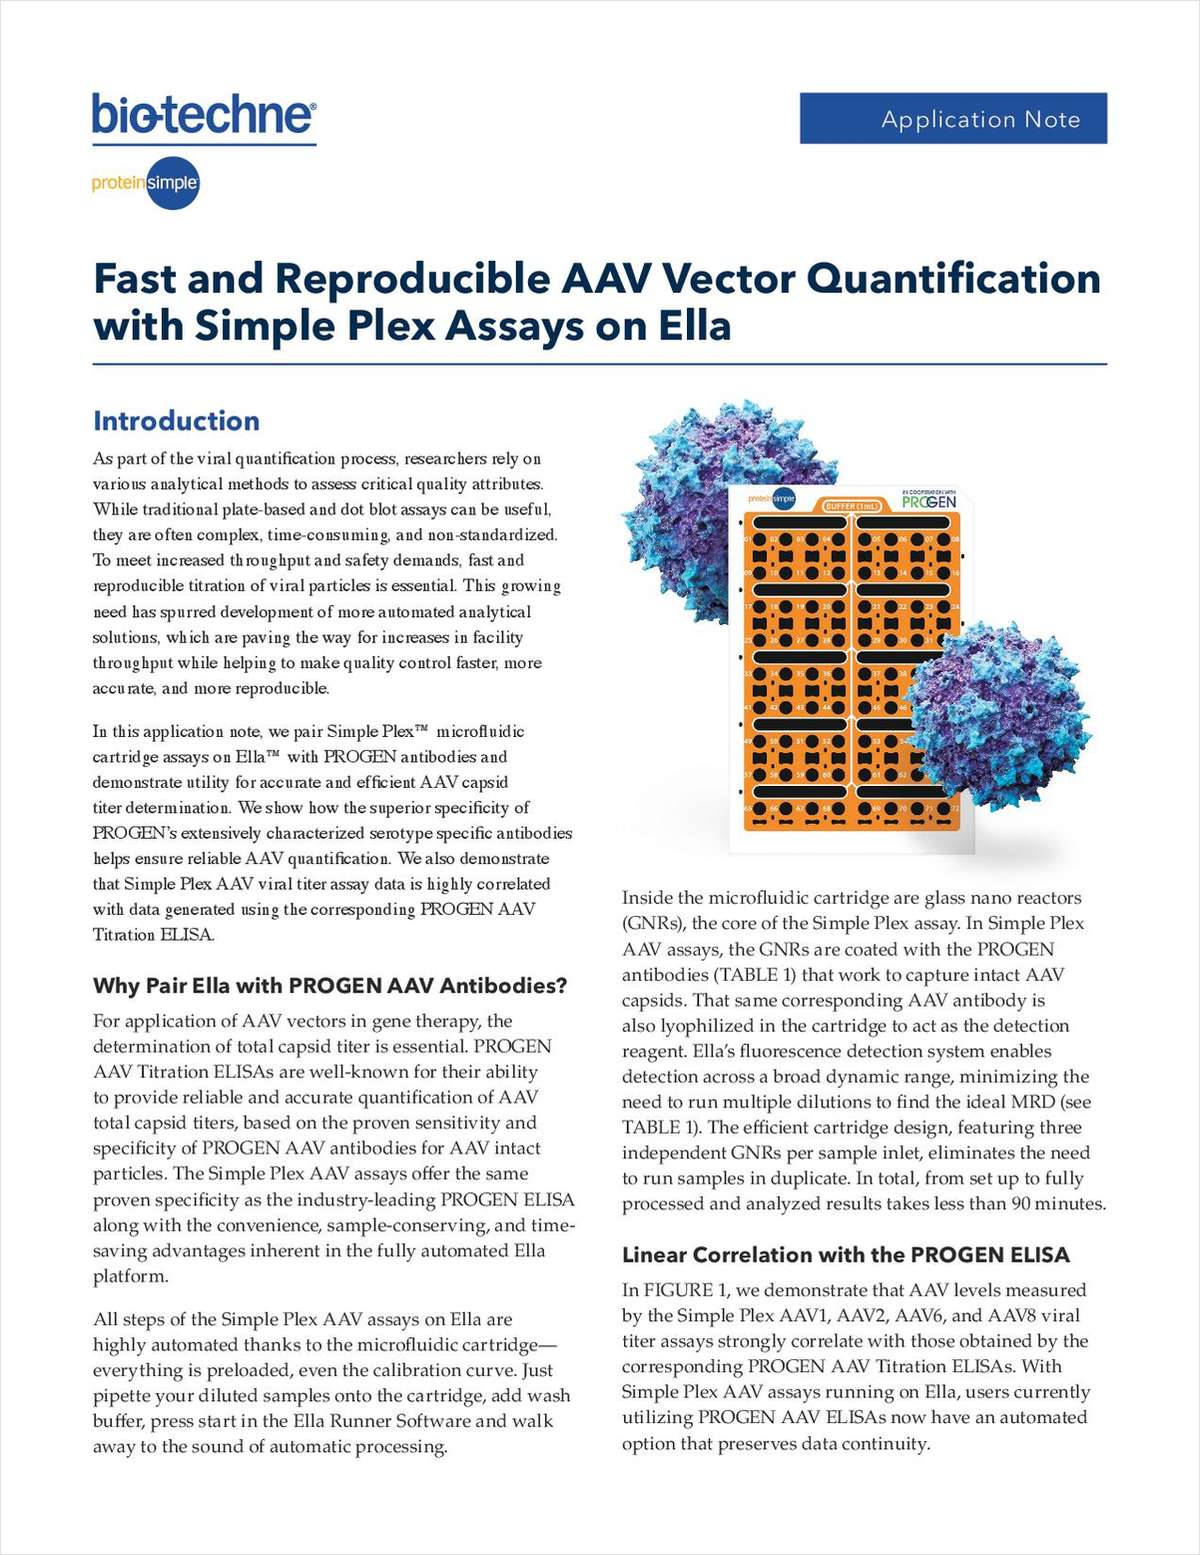 Fast and Reproducible AAV Vector Quantification with Simple Plex Assays on Ella